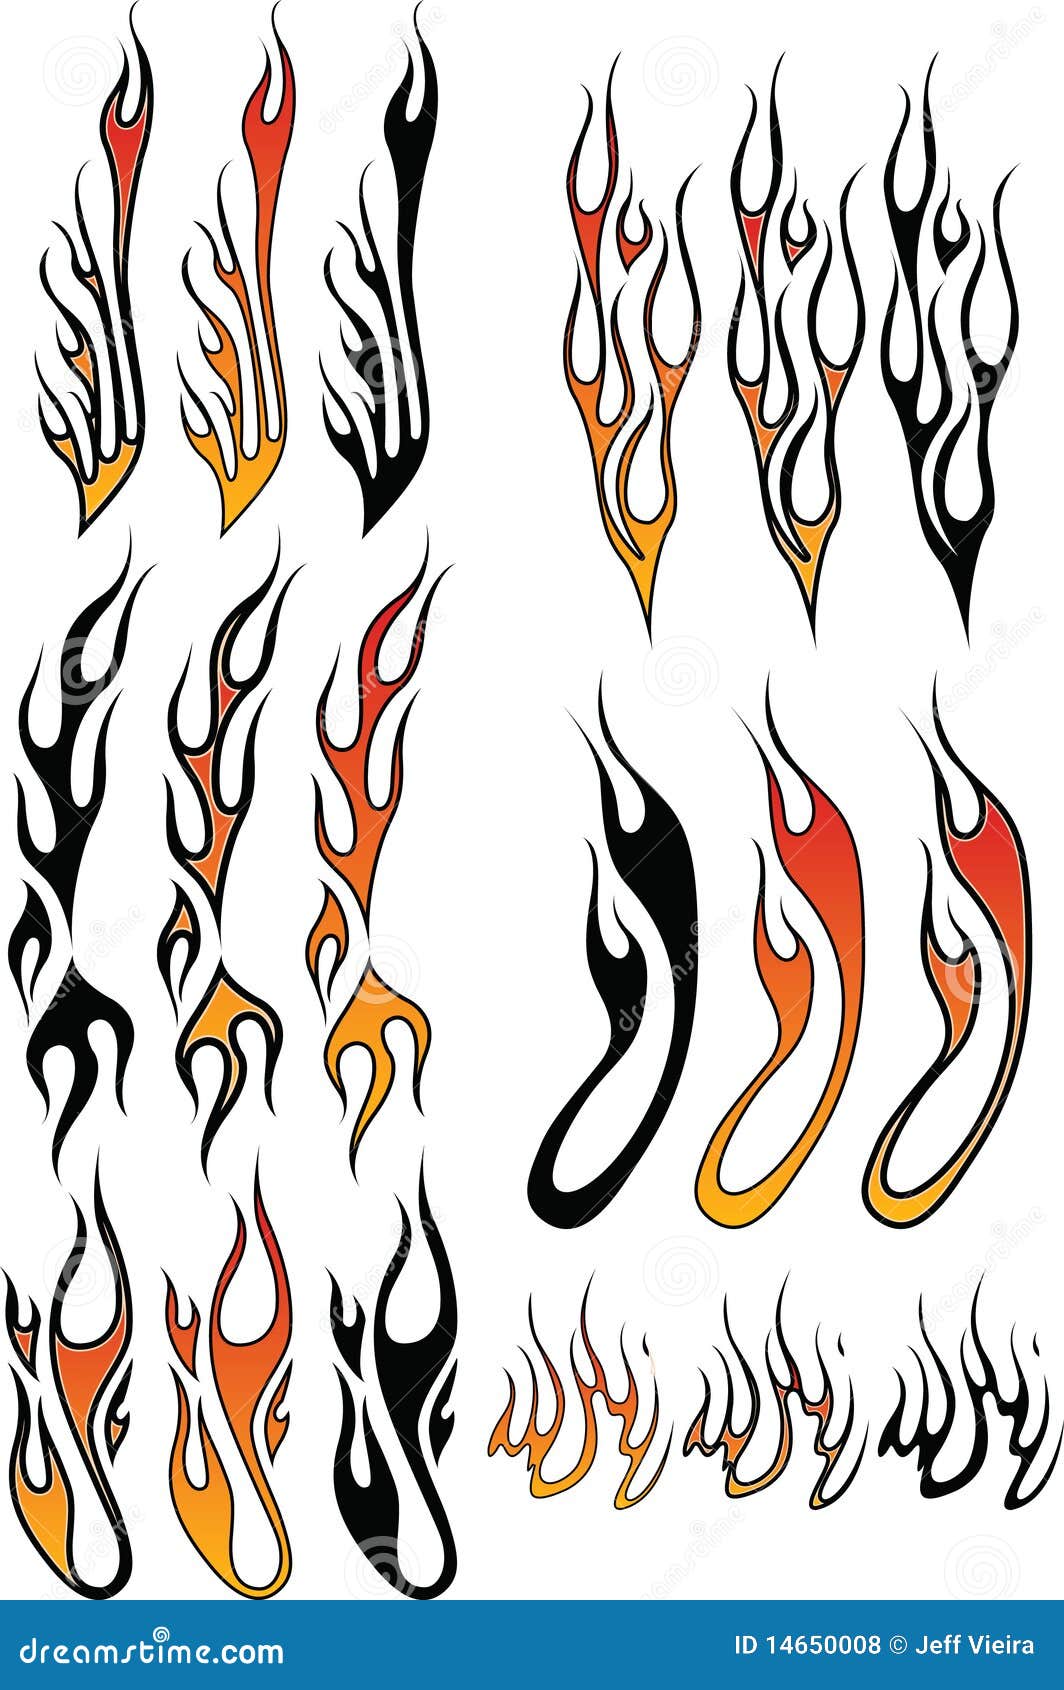 Flames_3 stock vector. Image of flames, tattoo, decals - 14650008